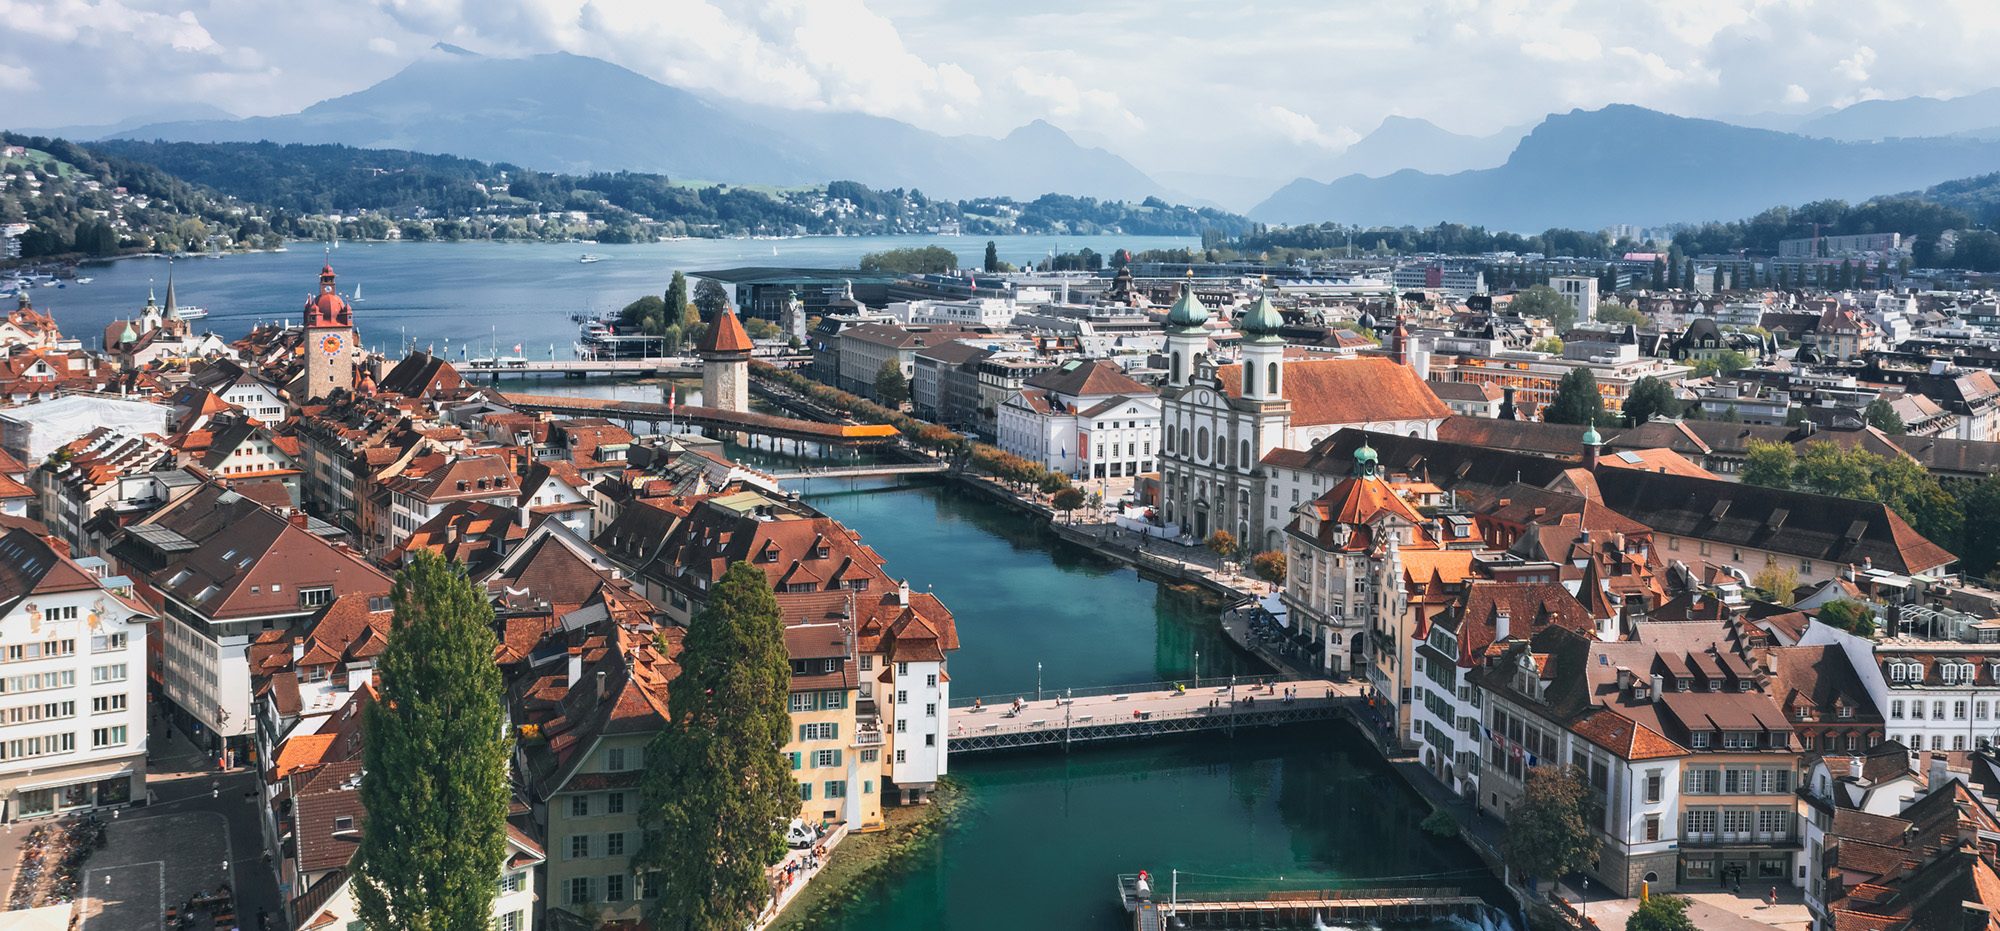 Aerial view of lucerne with the Kappeli-bridge in focus